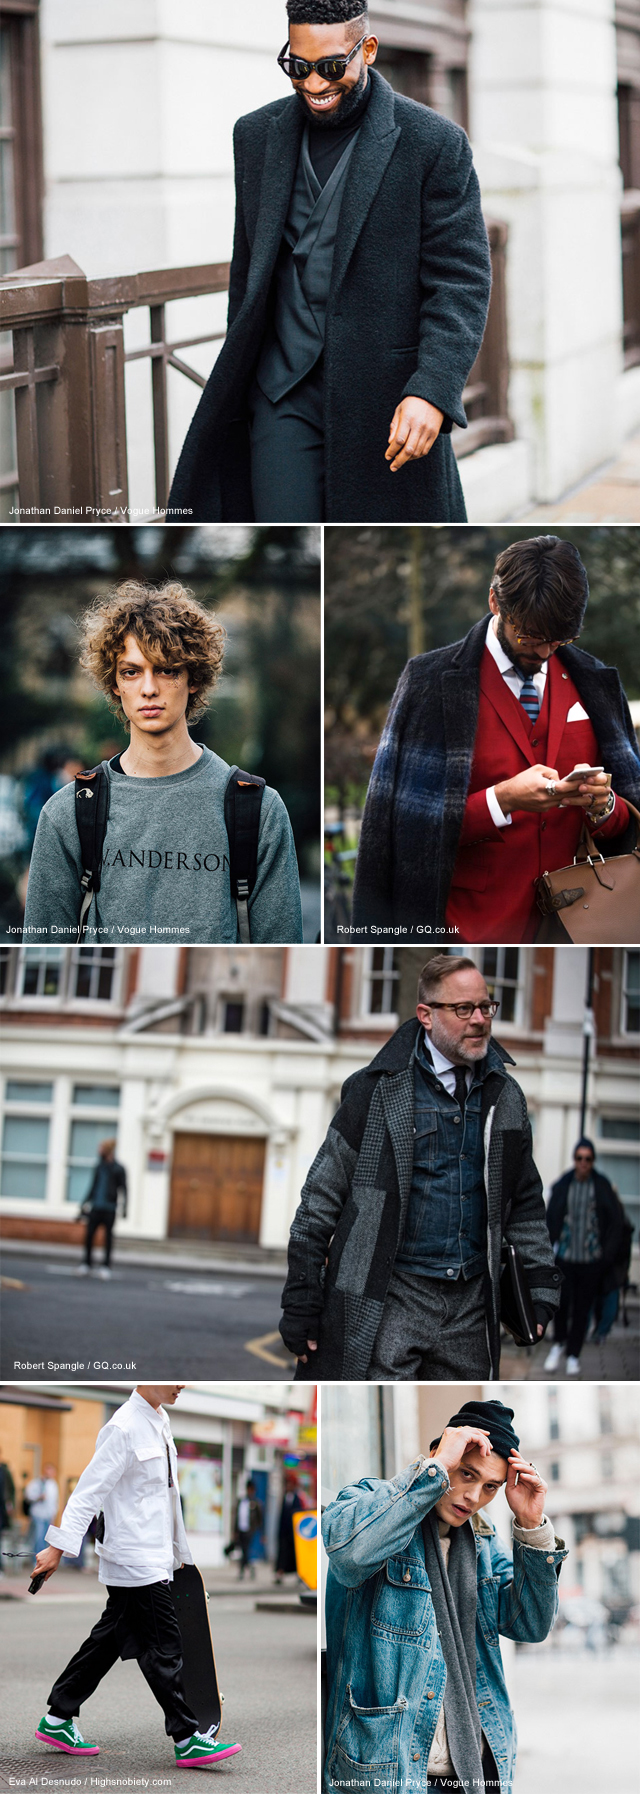 LCM London Collection Mens Street Style Spring Summer 2016